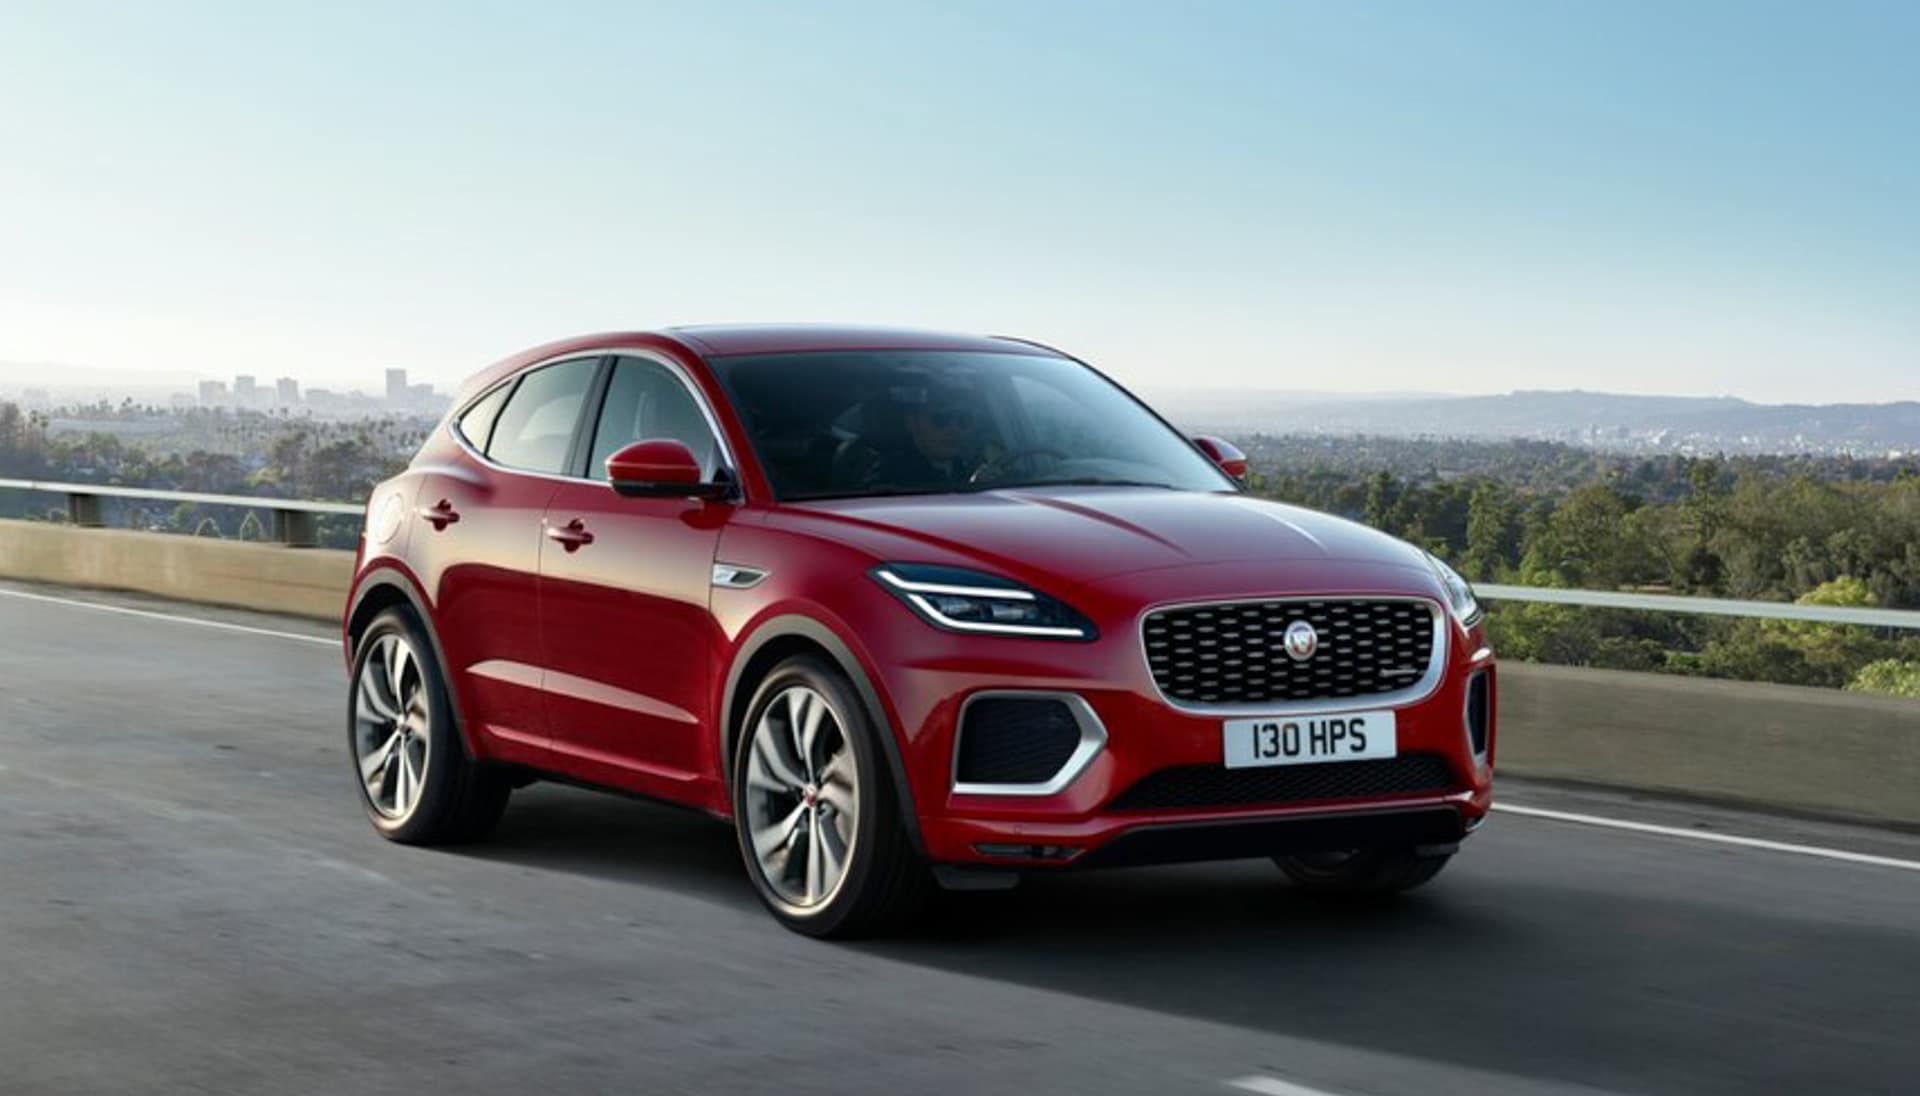 2021 Jaguar E-PACE Prices, Reviews, and Photos - MotorTrend